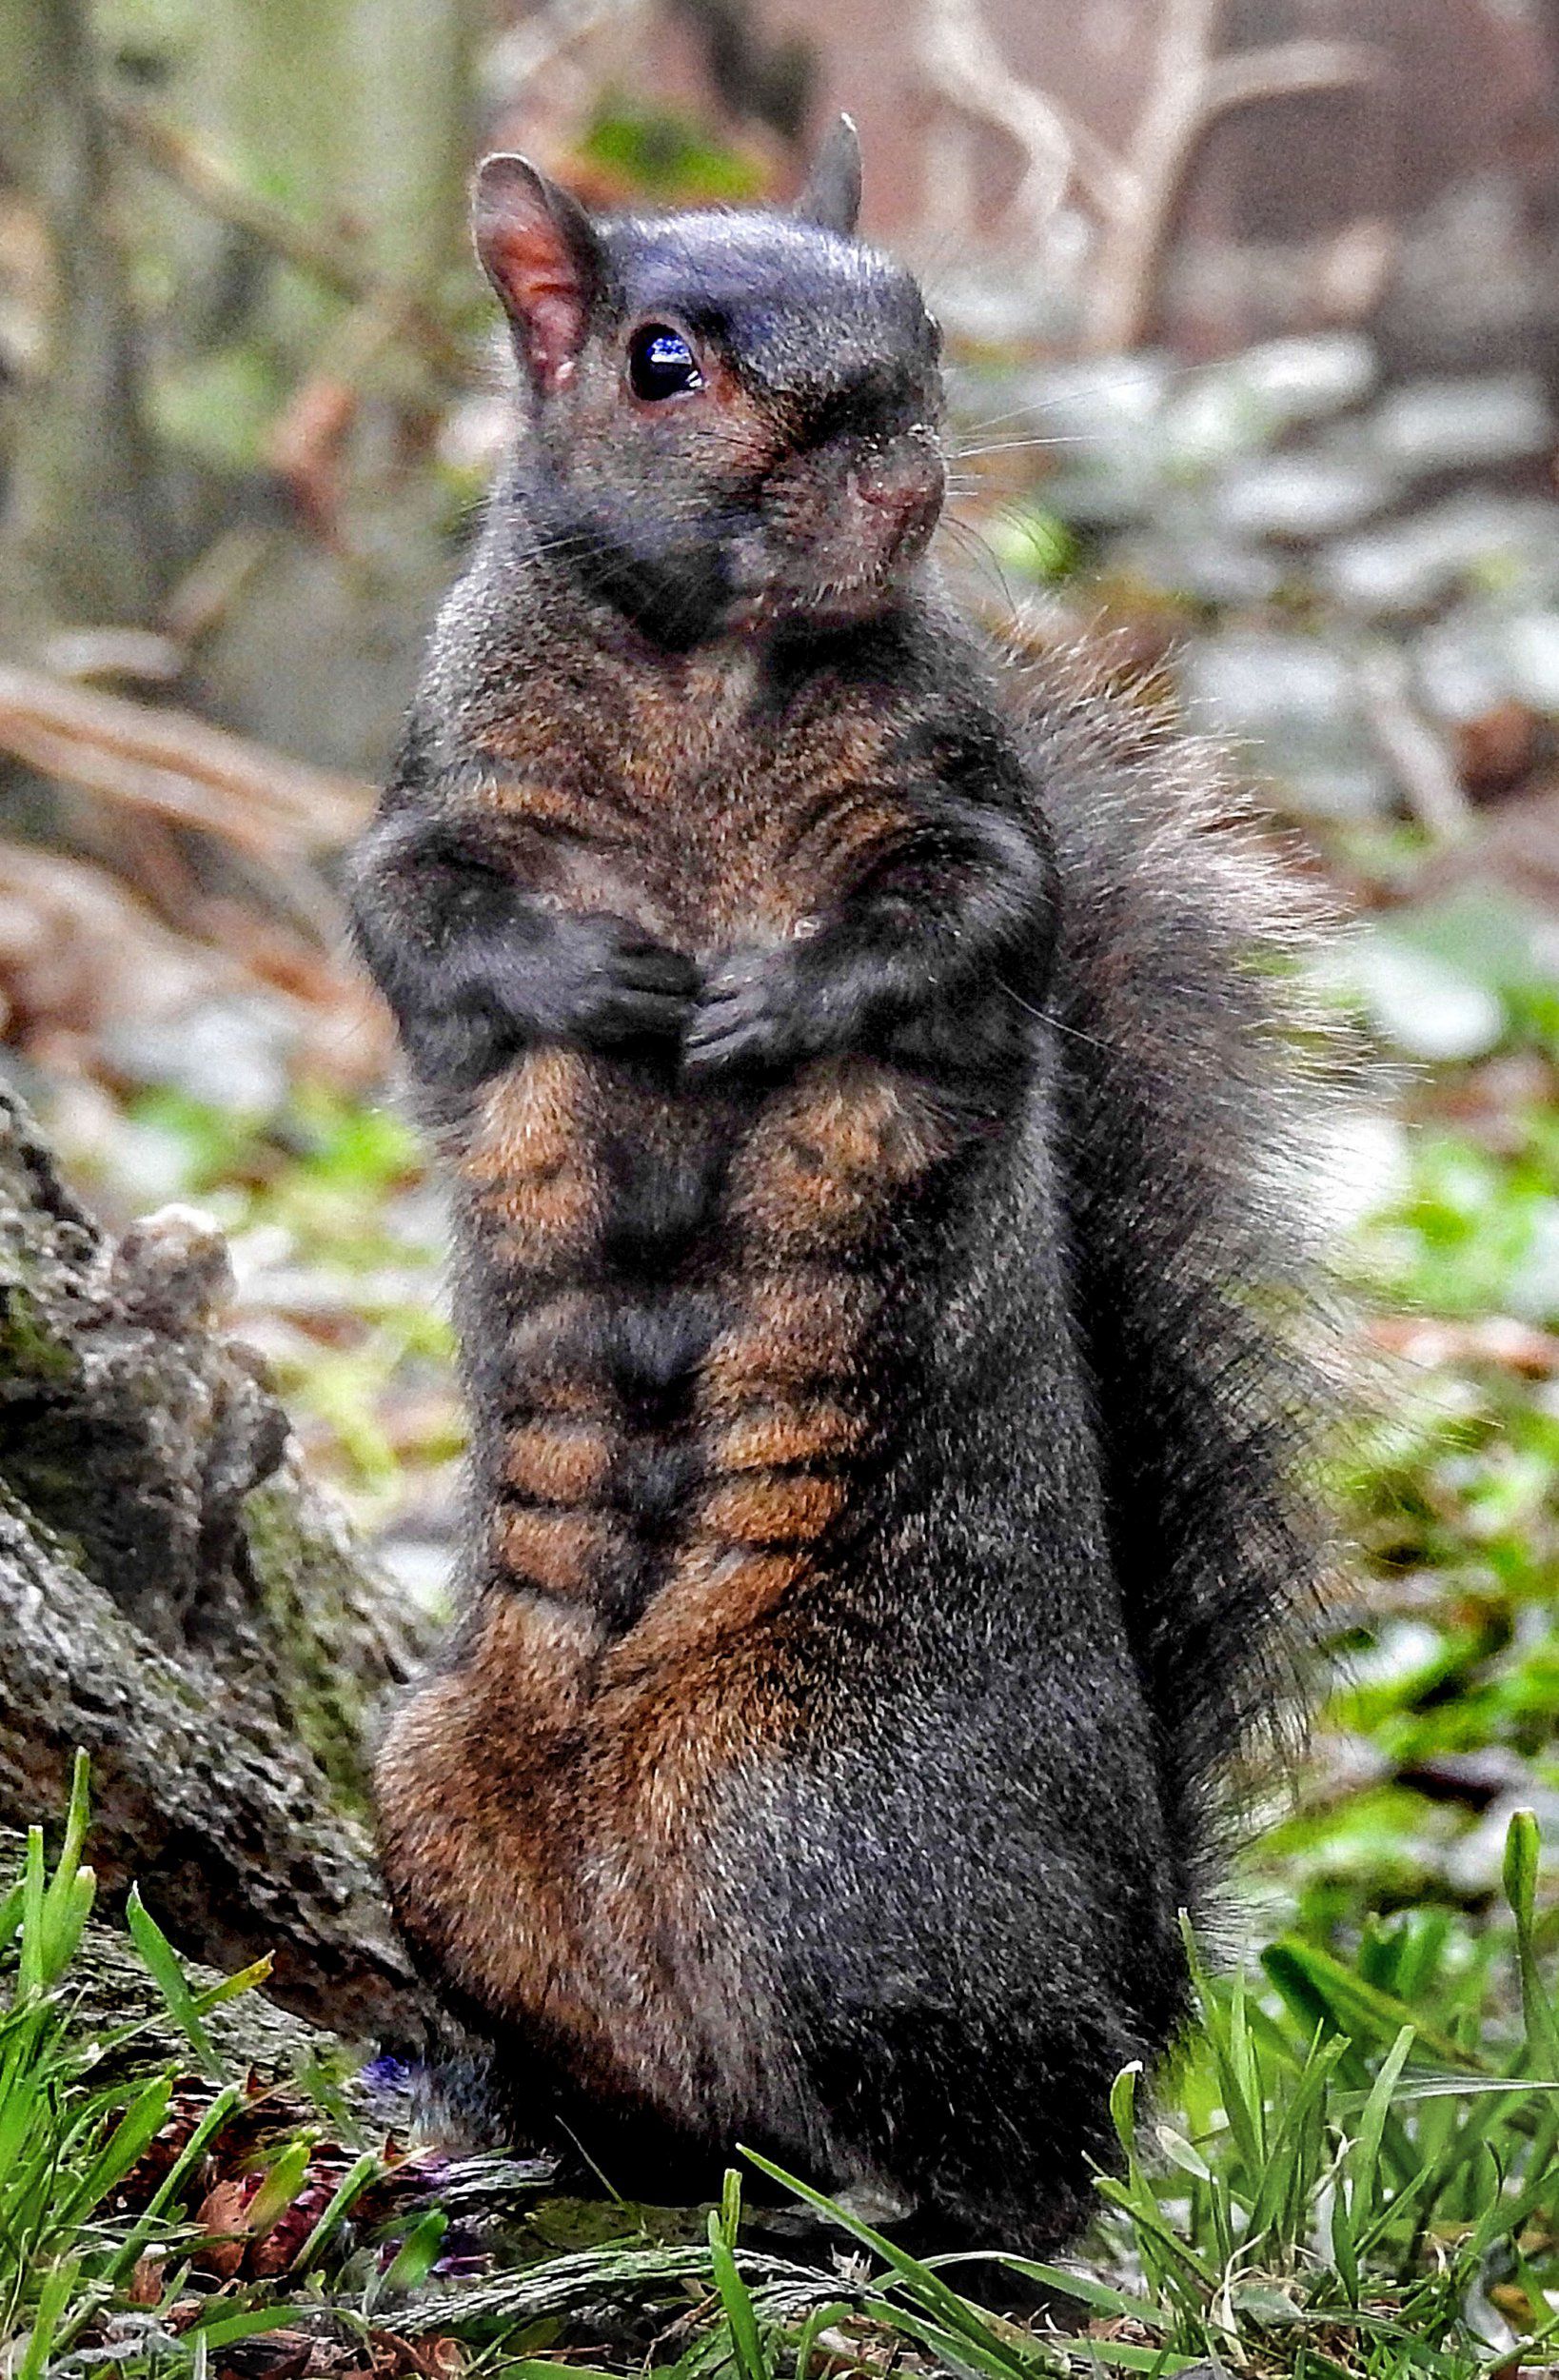 Black squirrel shows off a six pack in picture taken in Baldock ...